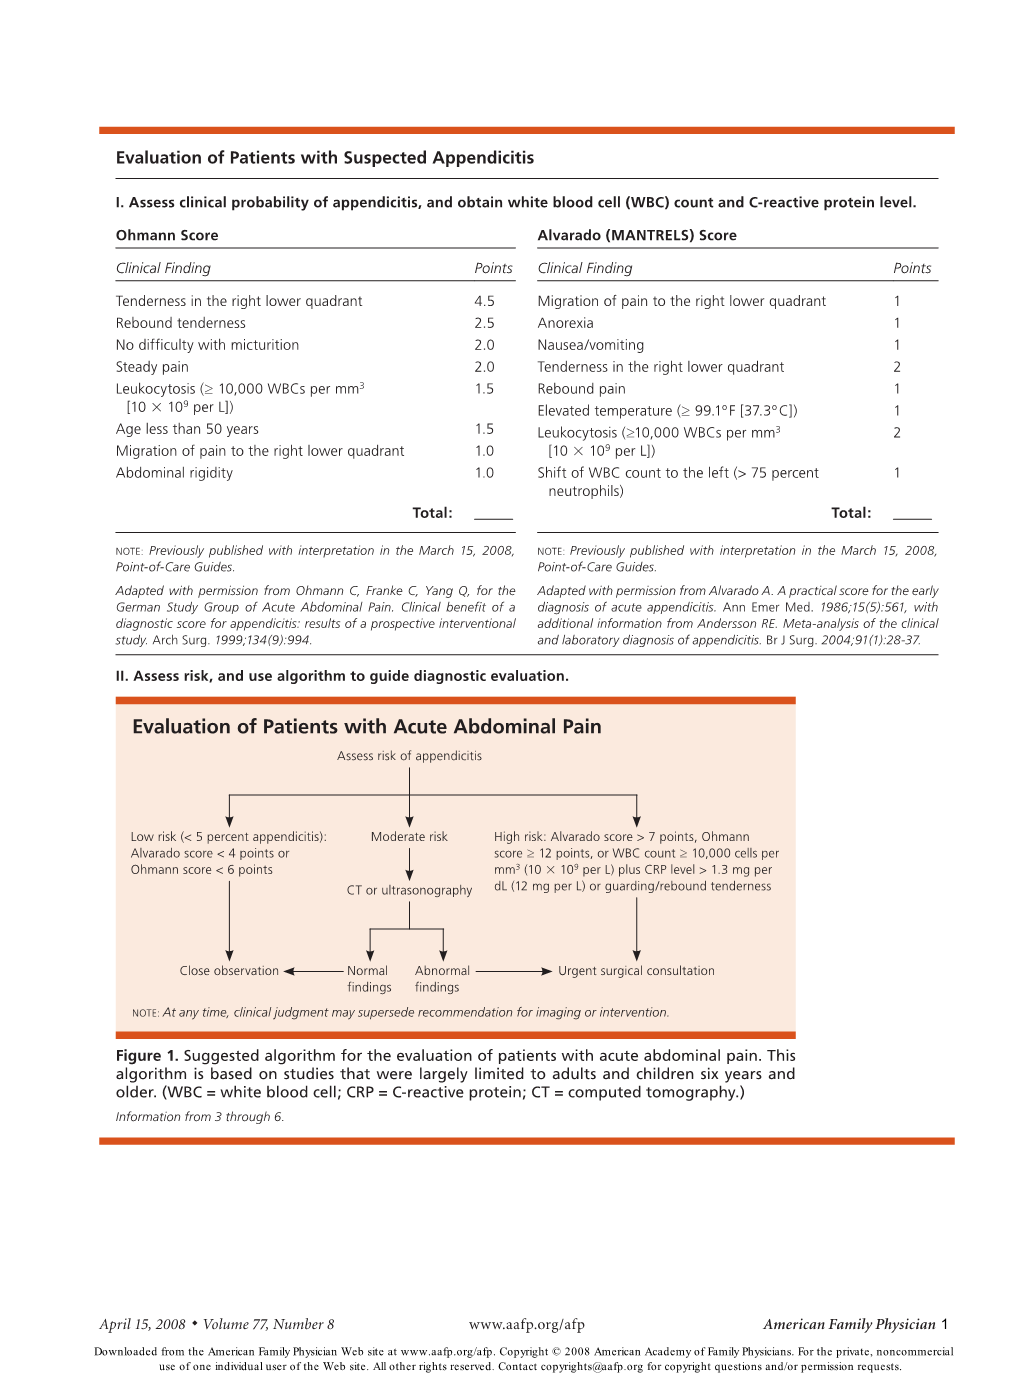 Evaluation of Patients with Acute Abdominal Pain Assess Risk of Appendicitis